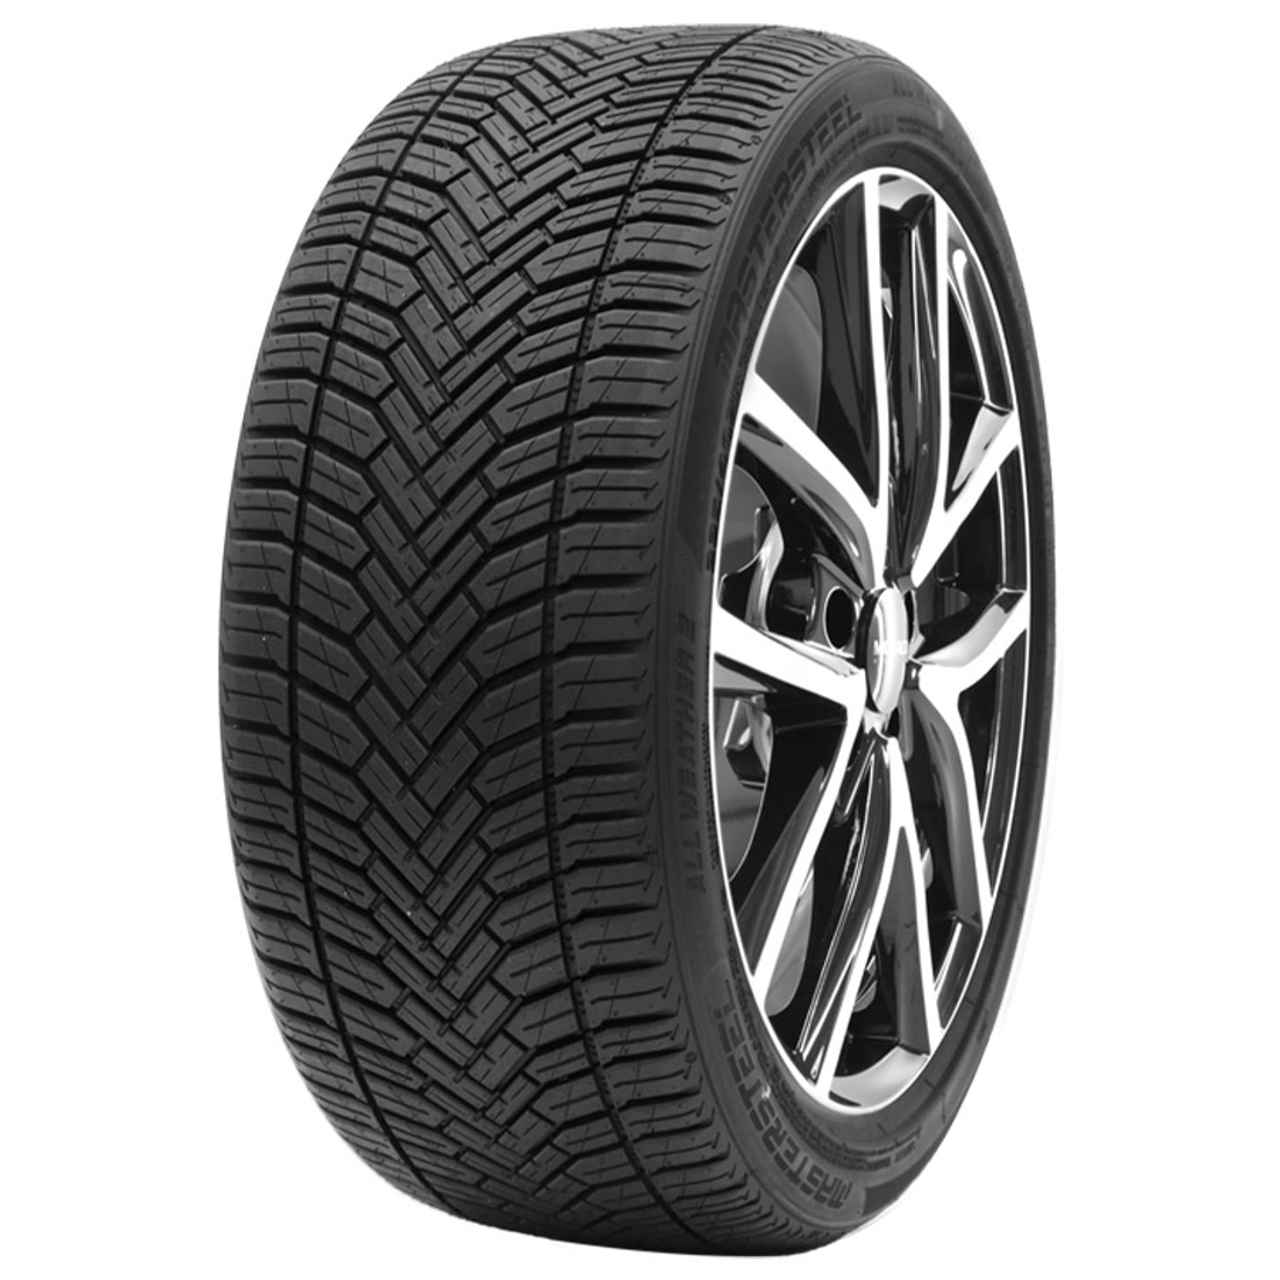 MASTERSTEEL ALL WEATHER 2 195/55R15 85H BSW